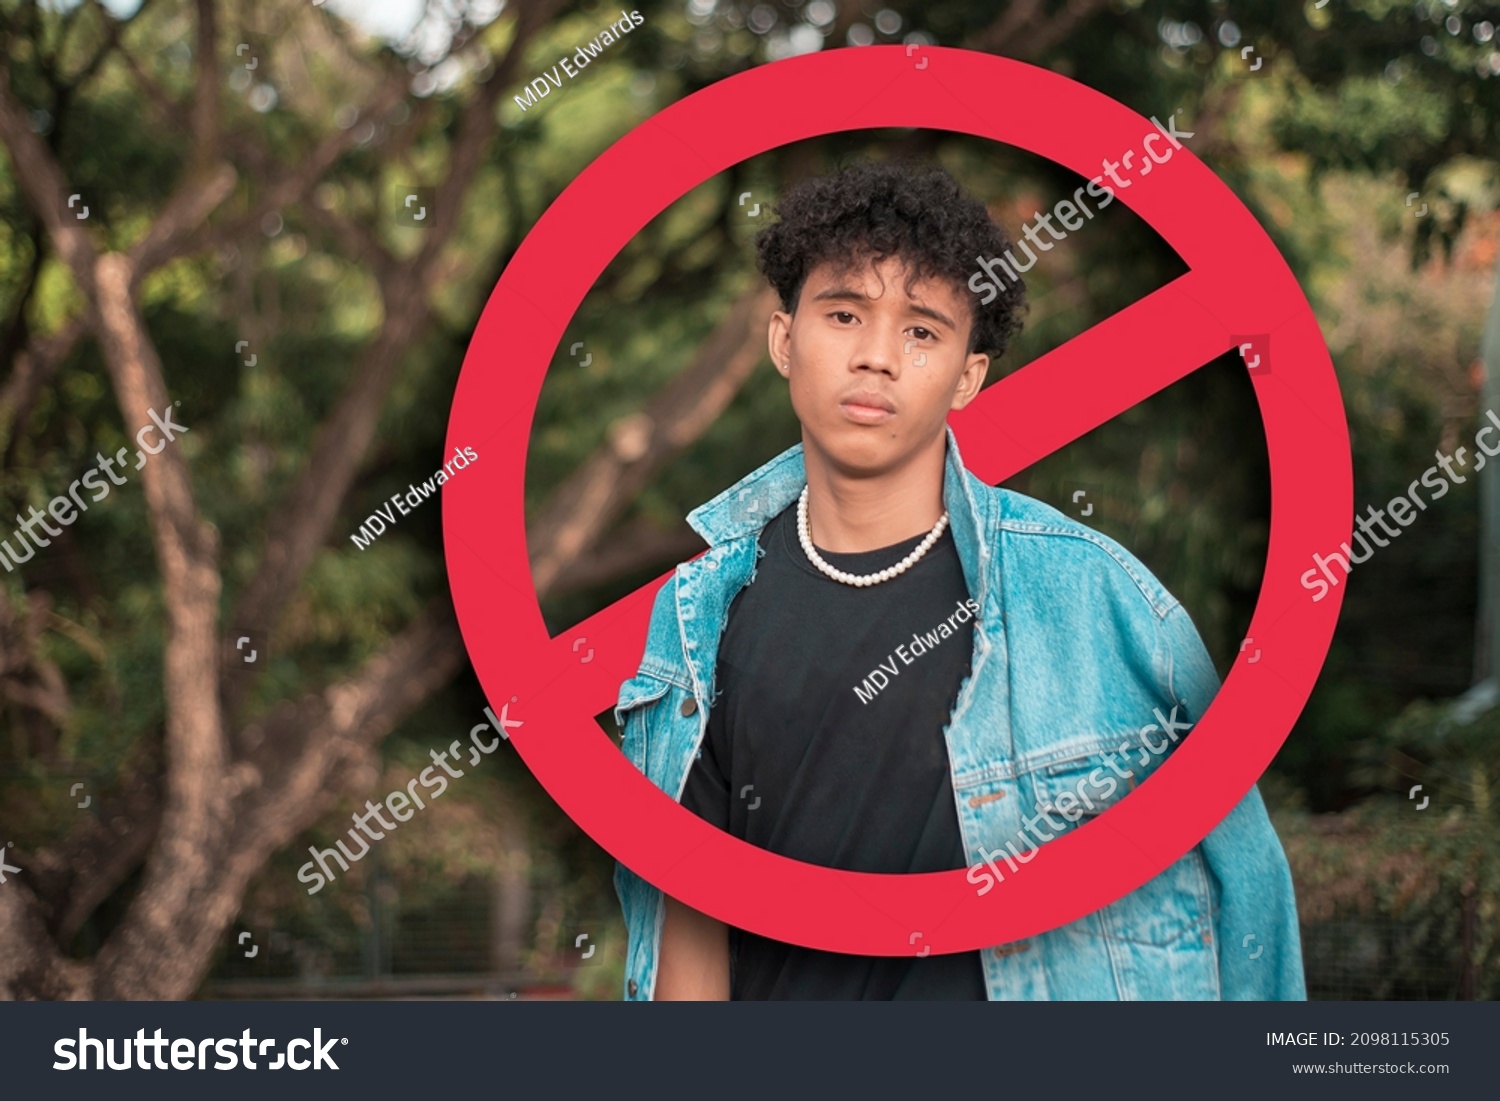 A depressed young man after being called out, shunned or blocked in social media or in person. Cancel culture concept. With stop sign graphic. #2098115305